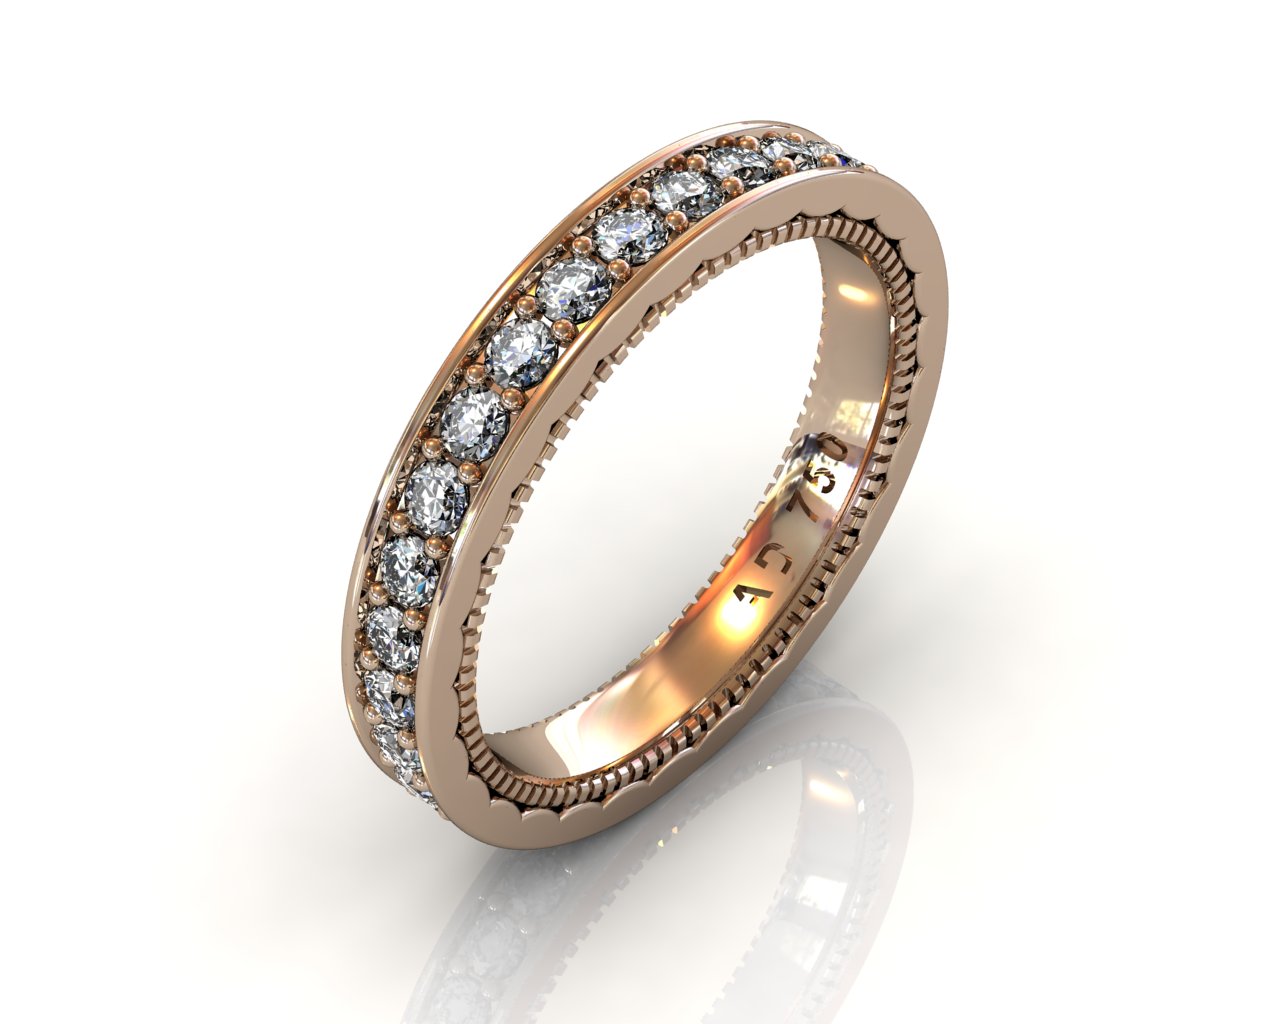 Wedding Bands Ladies Channel Set 30 Stone 0.89 TCW Diamonds 3.92g 18kt Rose Gold - South Bay Gold